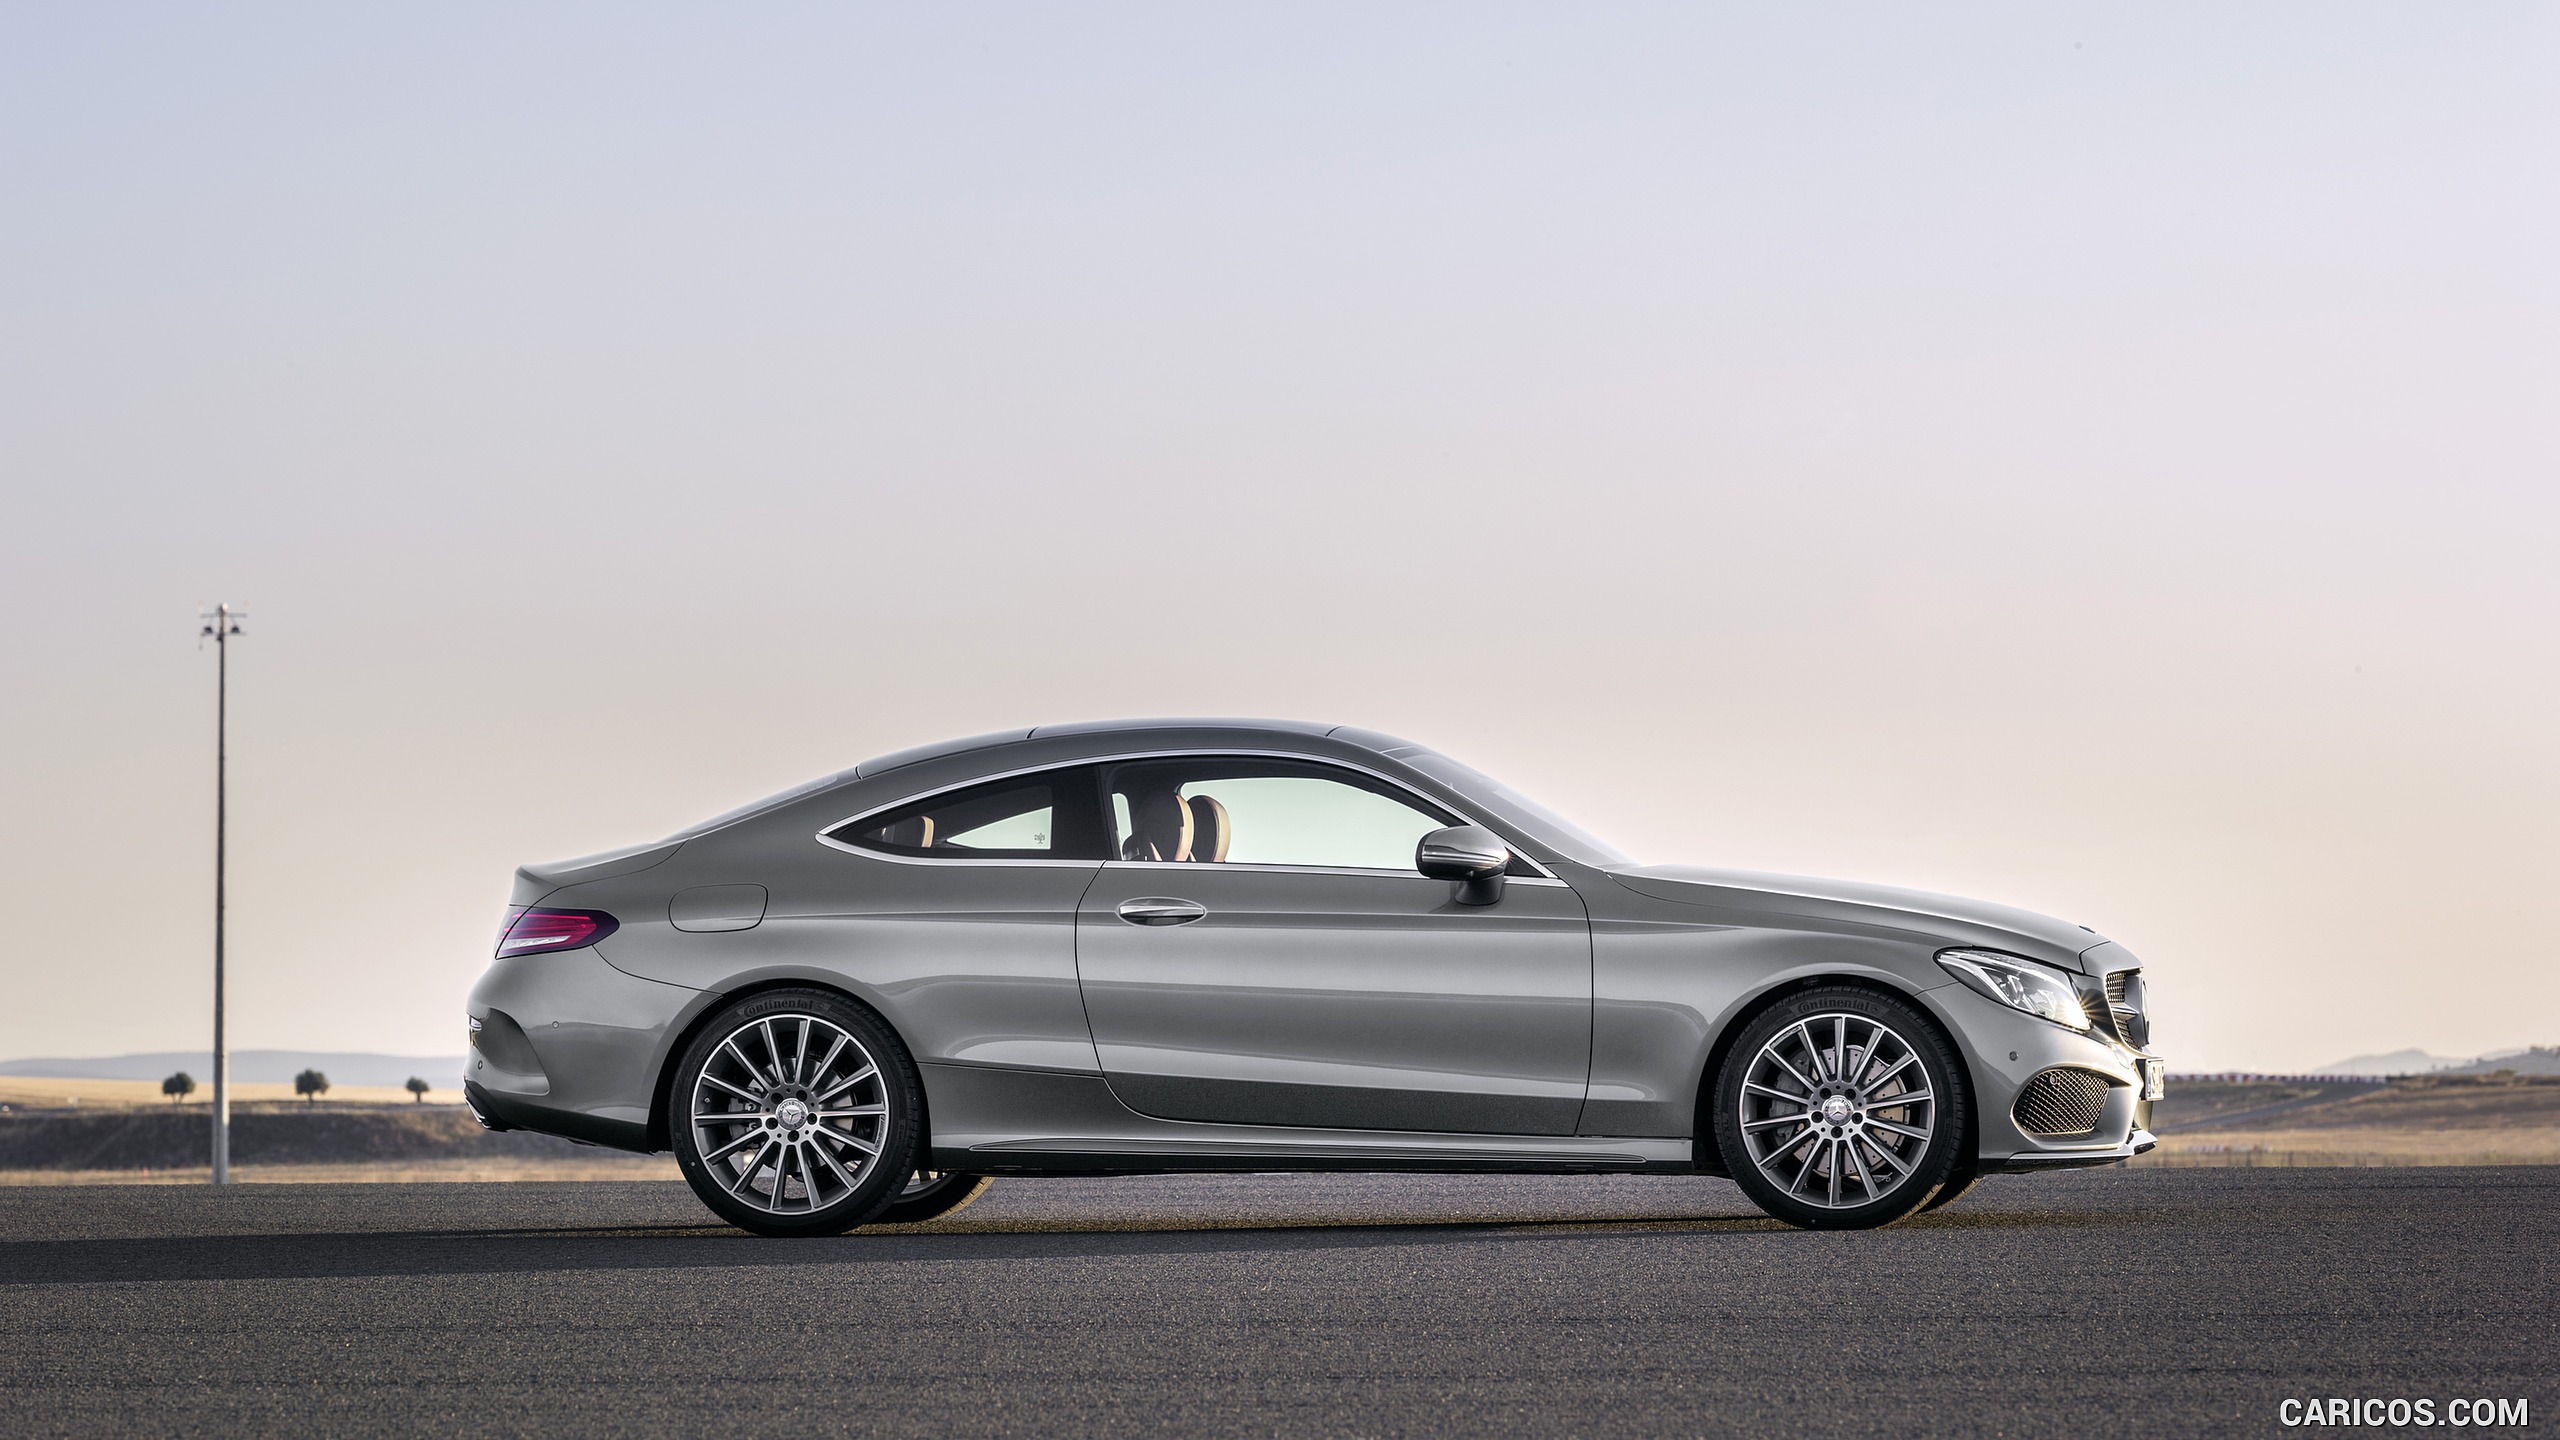 2017 Mercedes-Benz C-Class Coupe C300 (Selenit Grey) - Side, #56 of 210